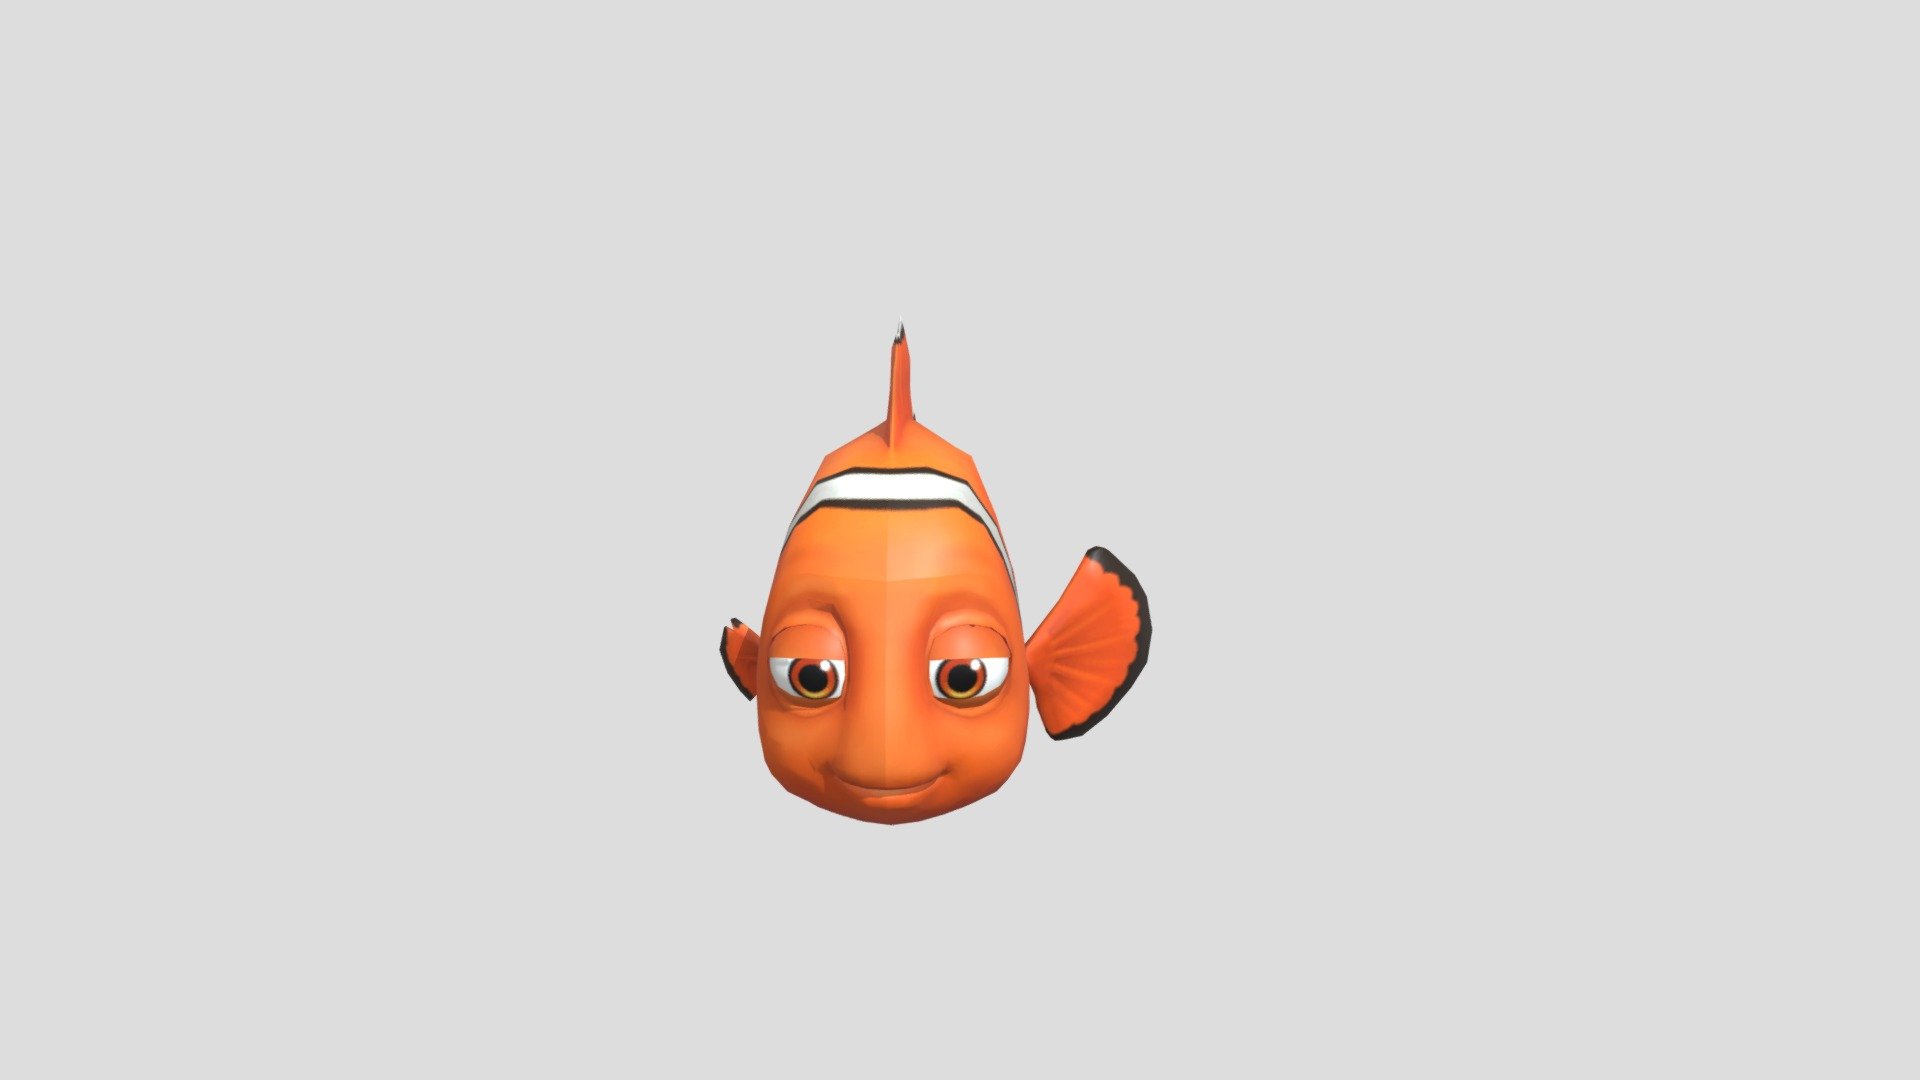 Nemo (Finding Nemo) - Download Free 3D model by gn434038 (@gn434038)  [82642f9]